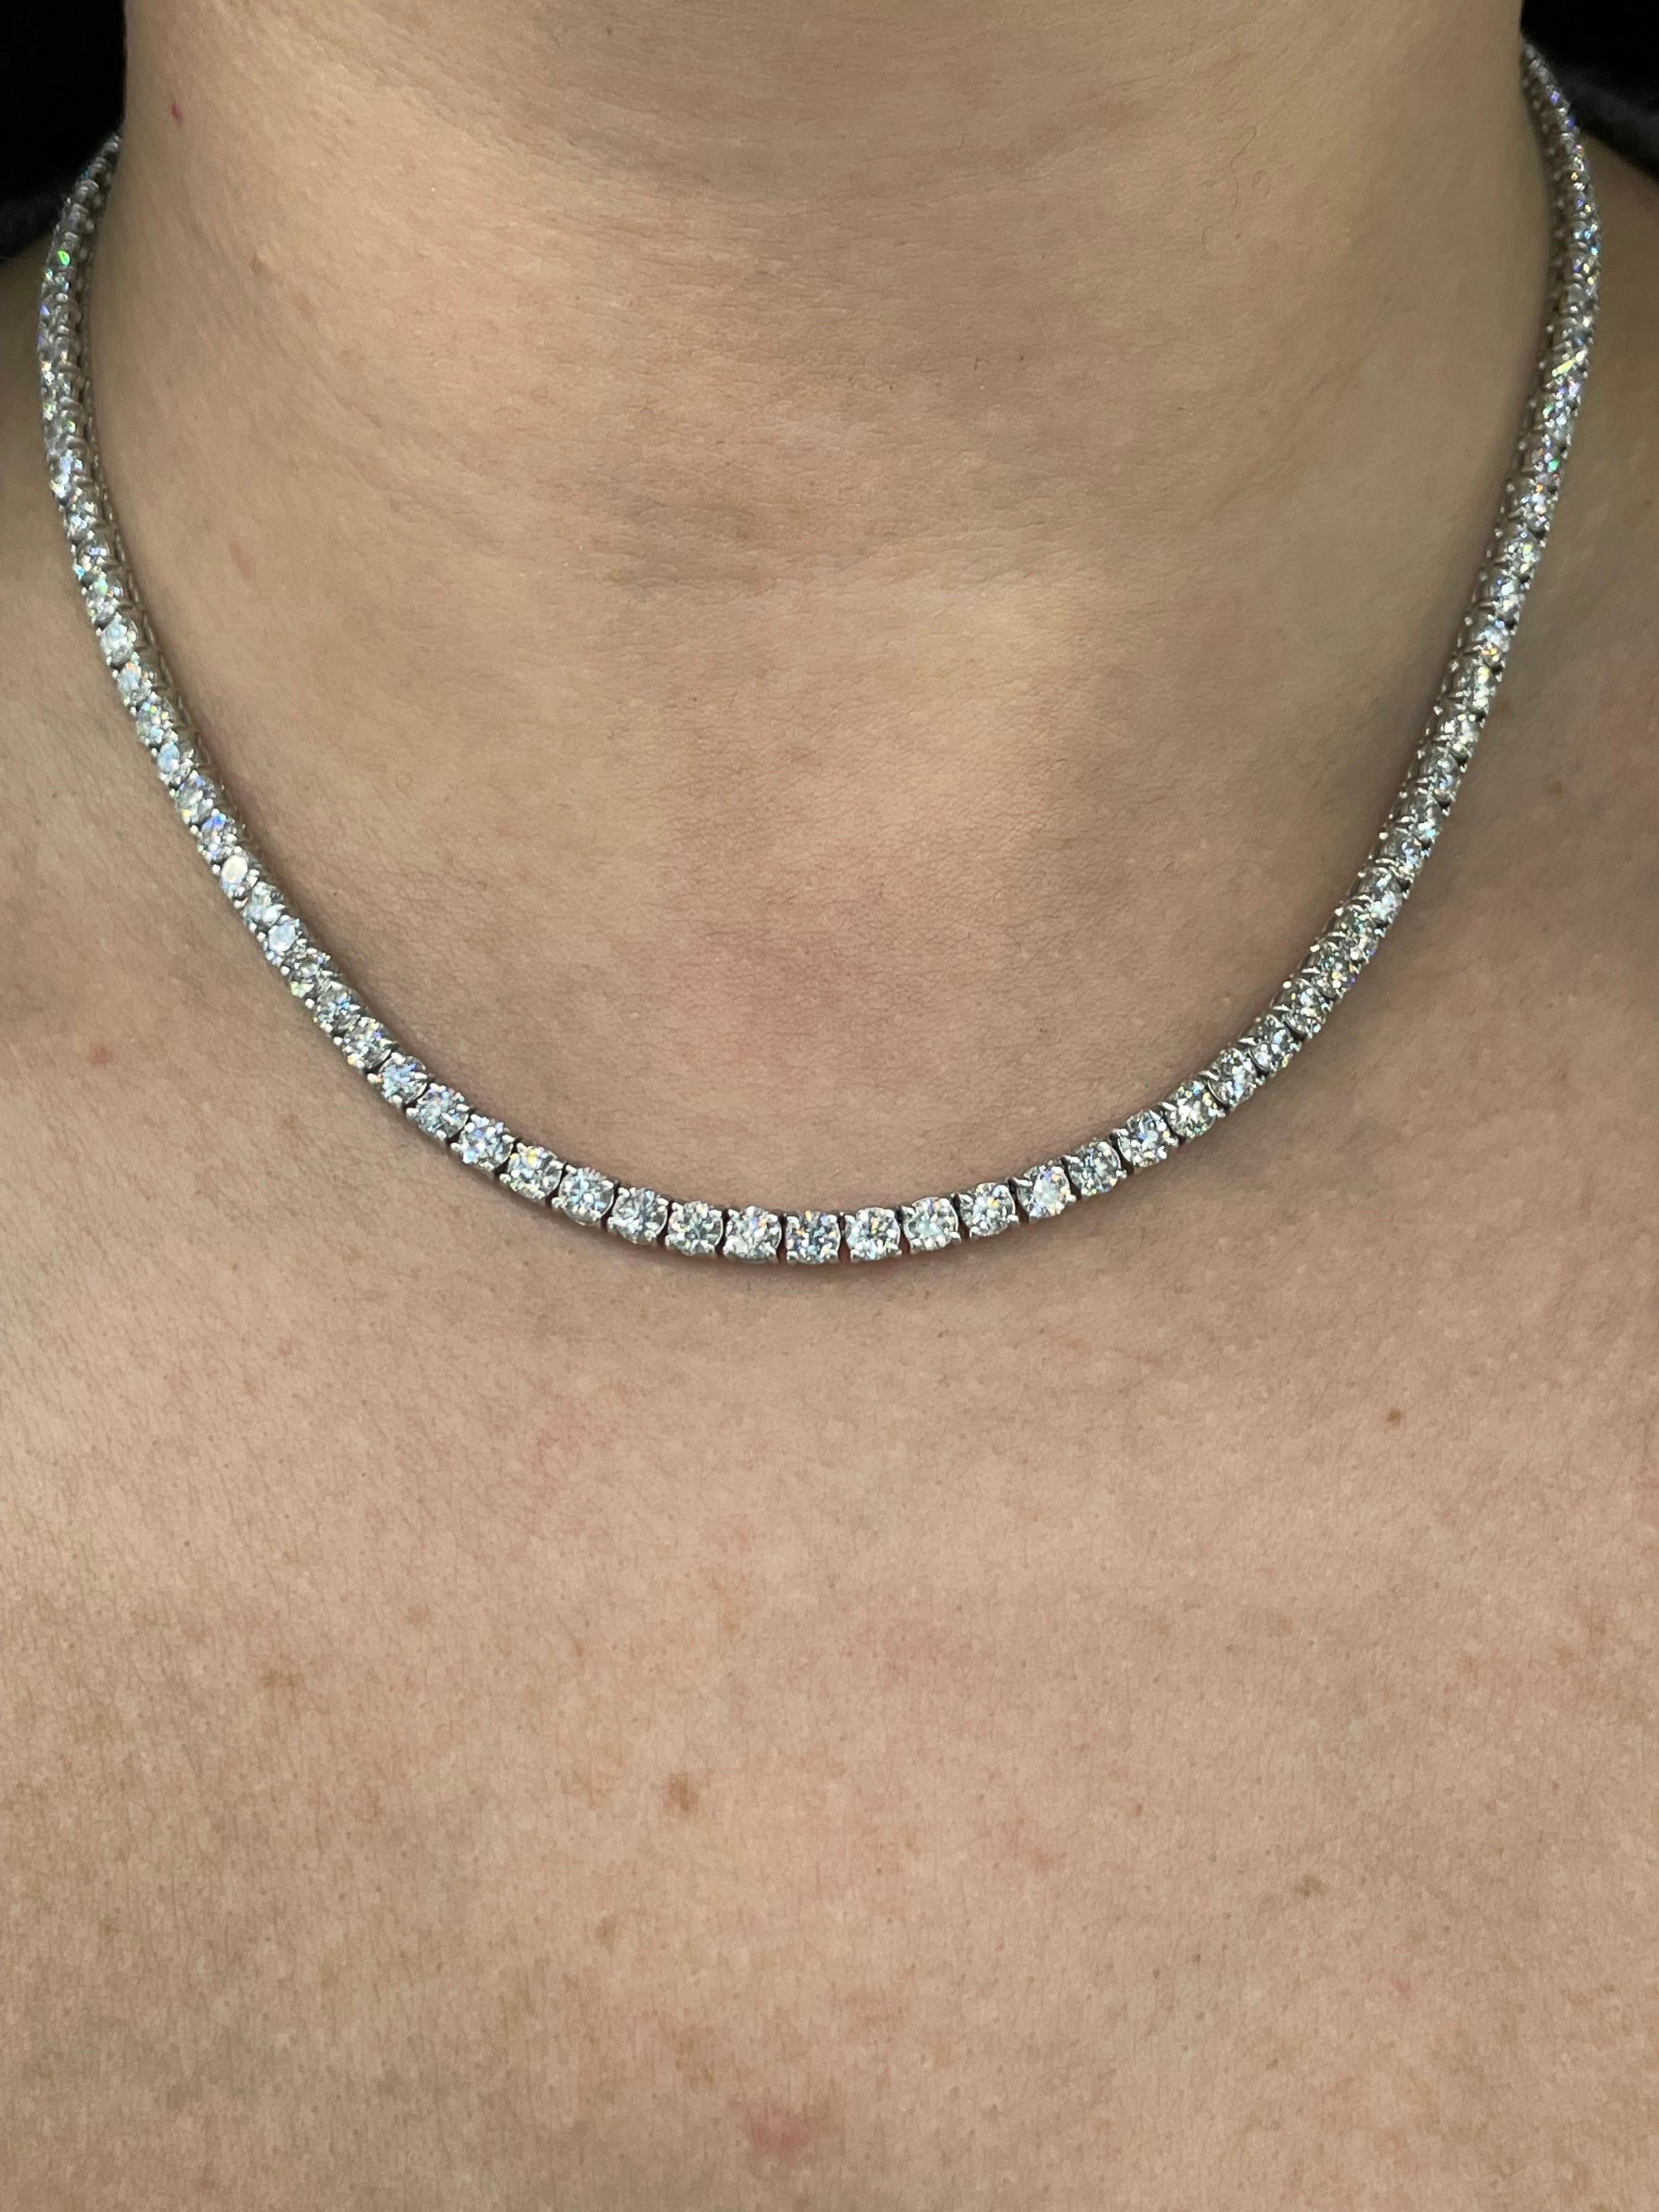 Diamonds Straight Line Necklace 17.25 Carats 14k White Gold 0.15 PTS For Sale 5